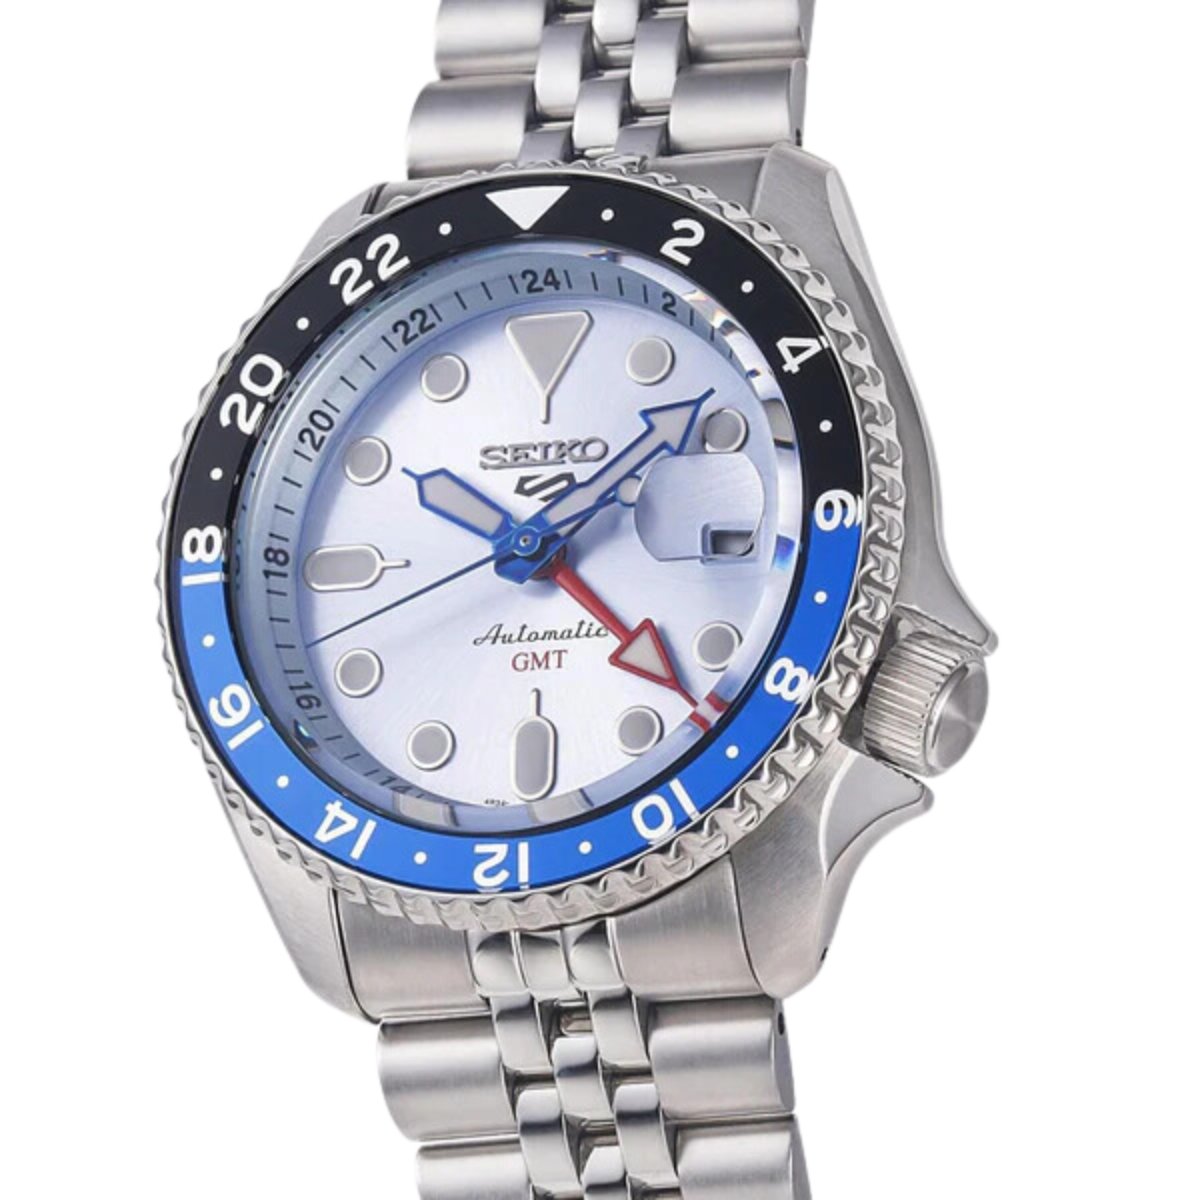 Seiko 5 Sports GMT SSK029K SSK029K1 SSK029 Limited Edition Automatic Watch (PRE-ORDER) -Seiko